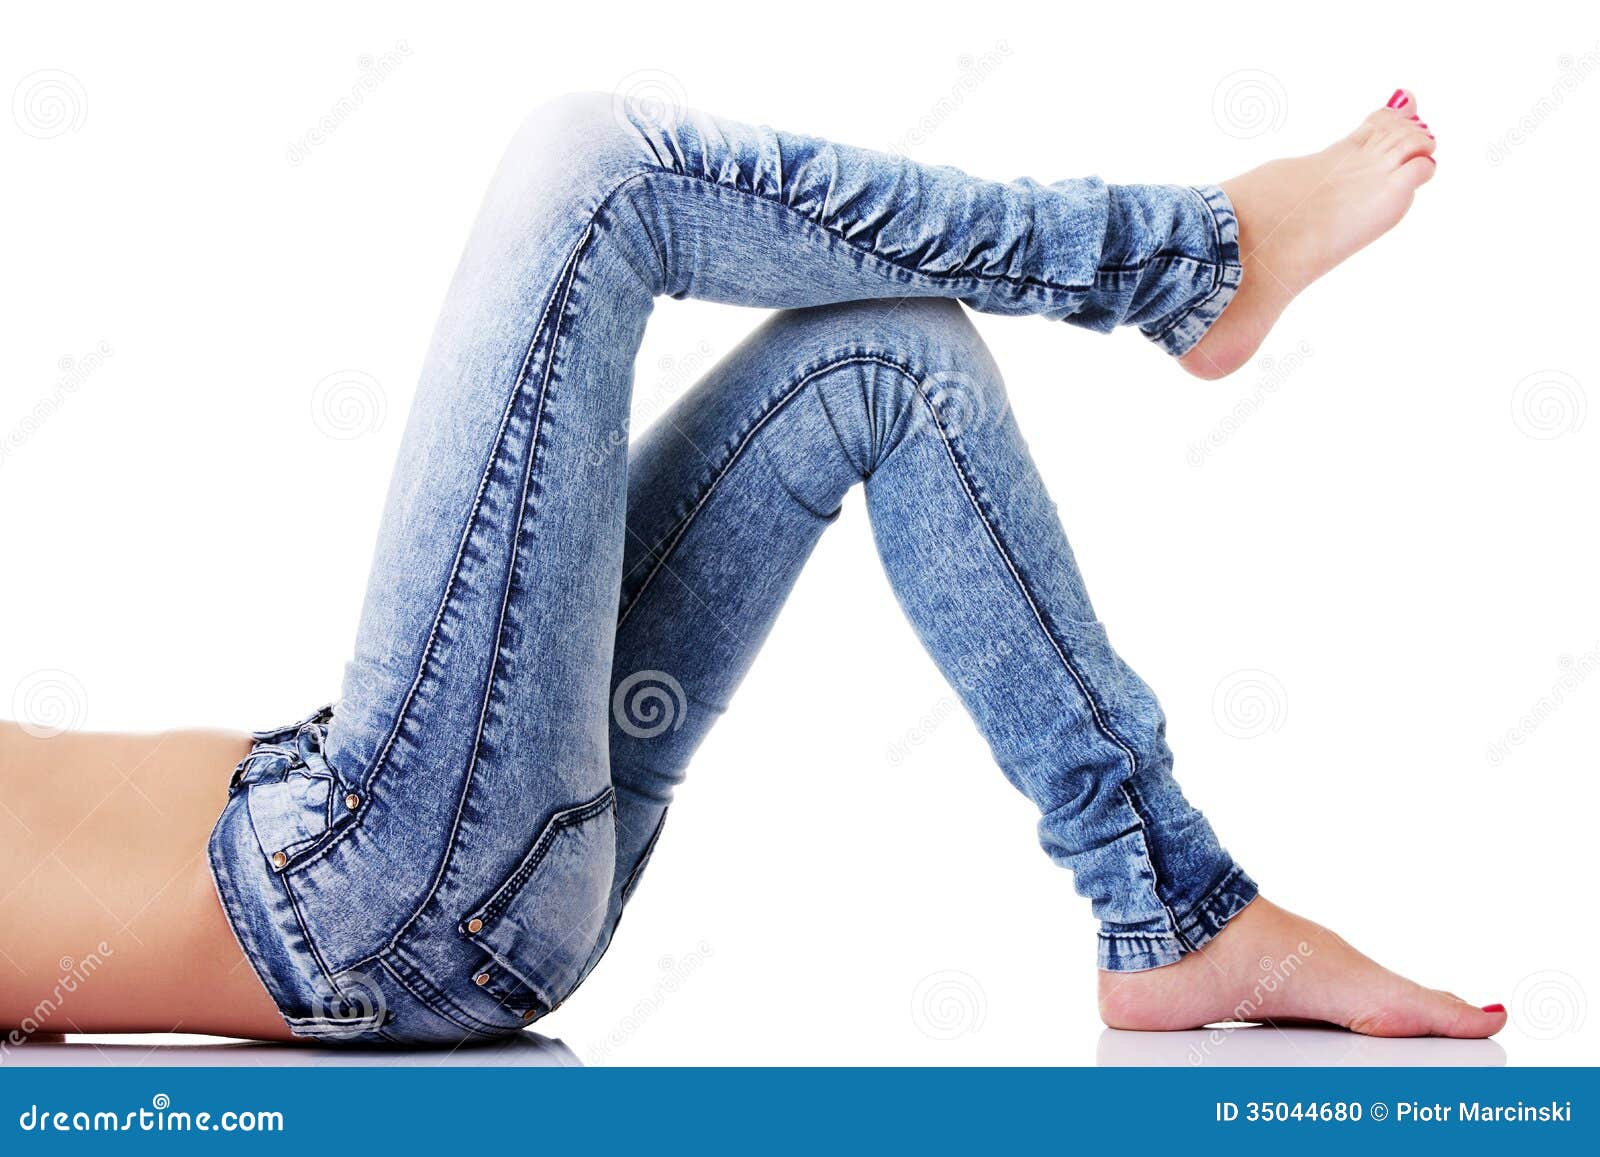 Female's Legs In Jeans On The Floor. Side View. Stock Photo - Image of